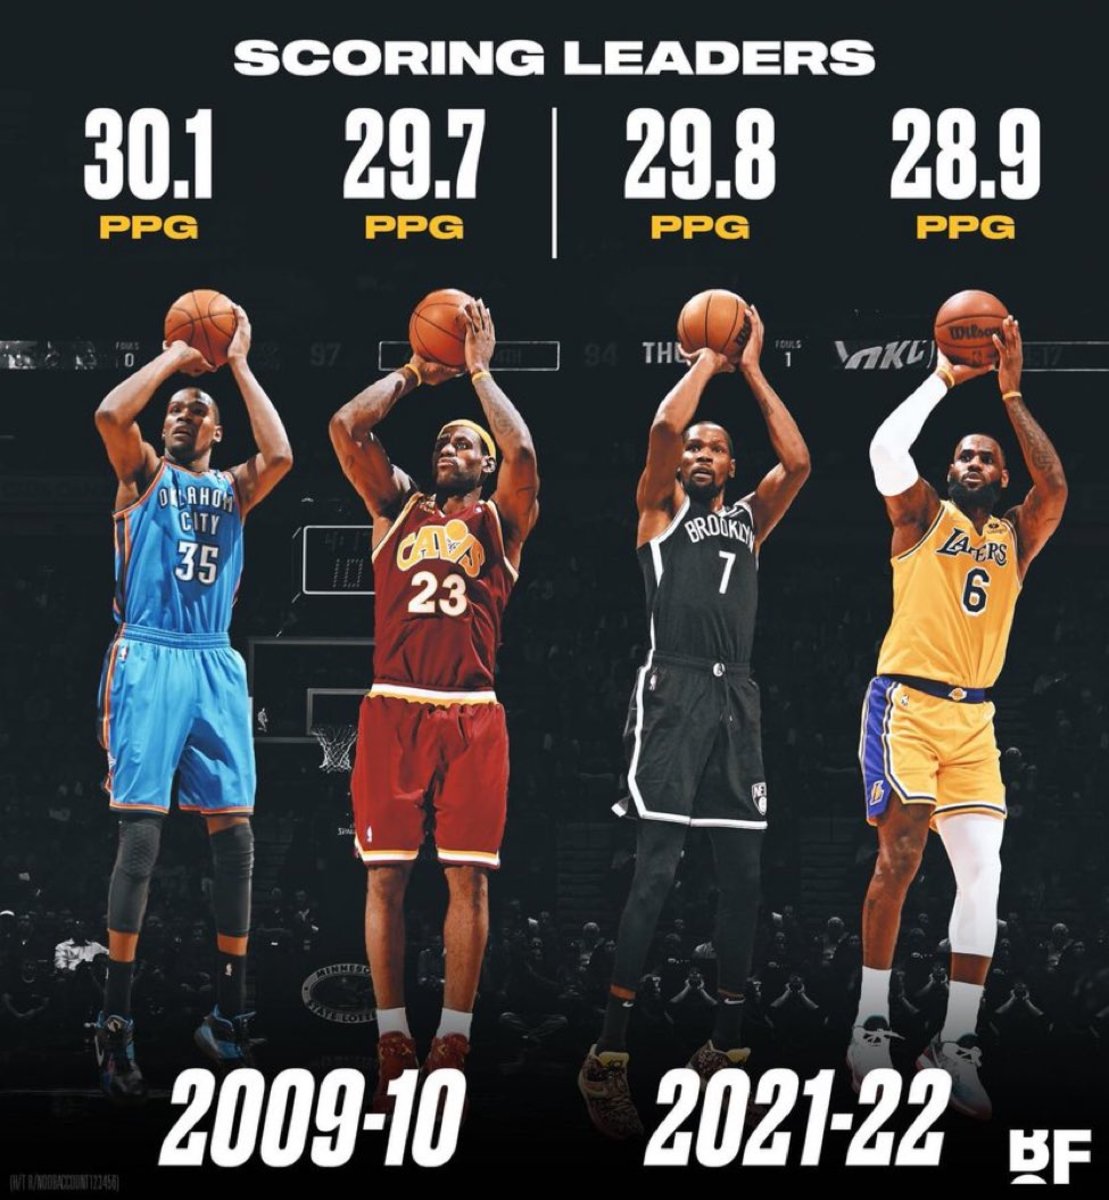 Kevin Durant And LeBron James Were Scoring Leaders In 2010, And They Are Scoring Leaders Again After 12 Years